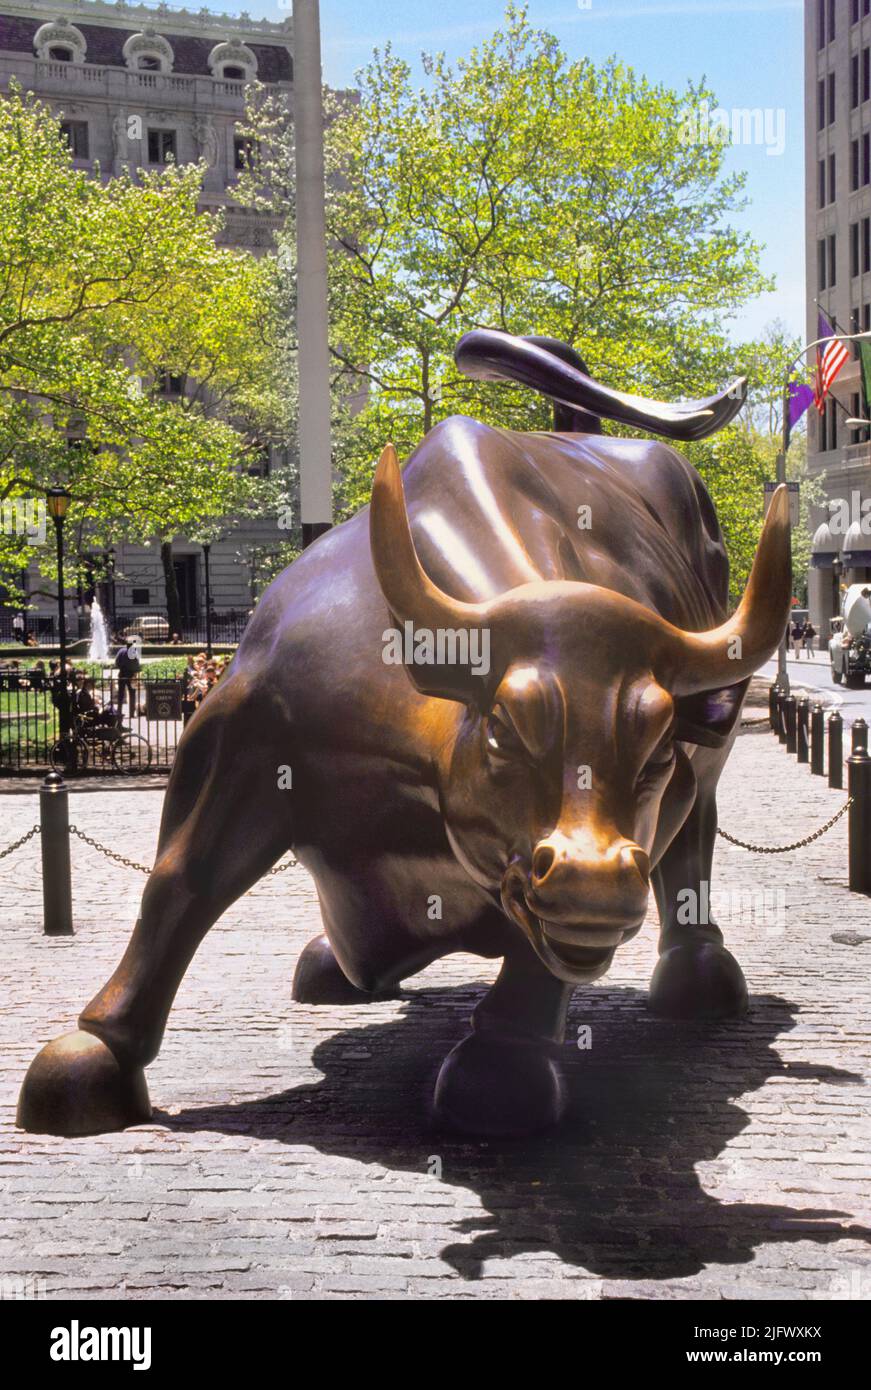 Wall Street Bull, Charging Bull or Bowling Green Bull. Bronze sculpture on Wall Street, Financial District of Lower Manhattan in New York City, USA. Stock Photo